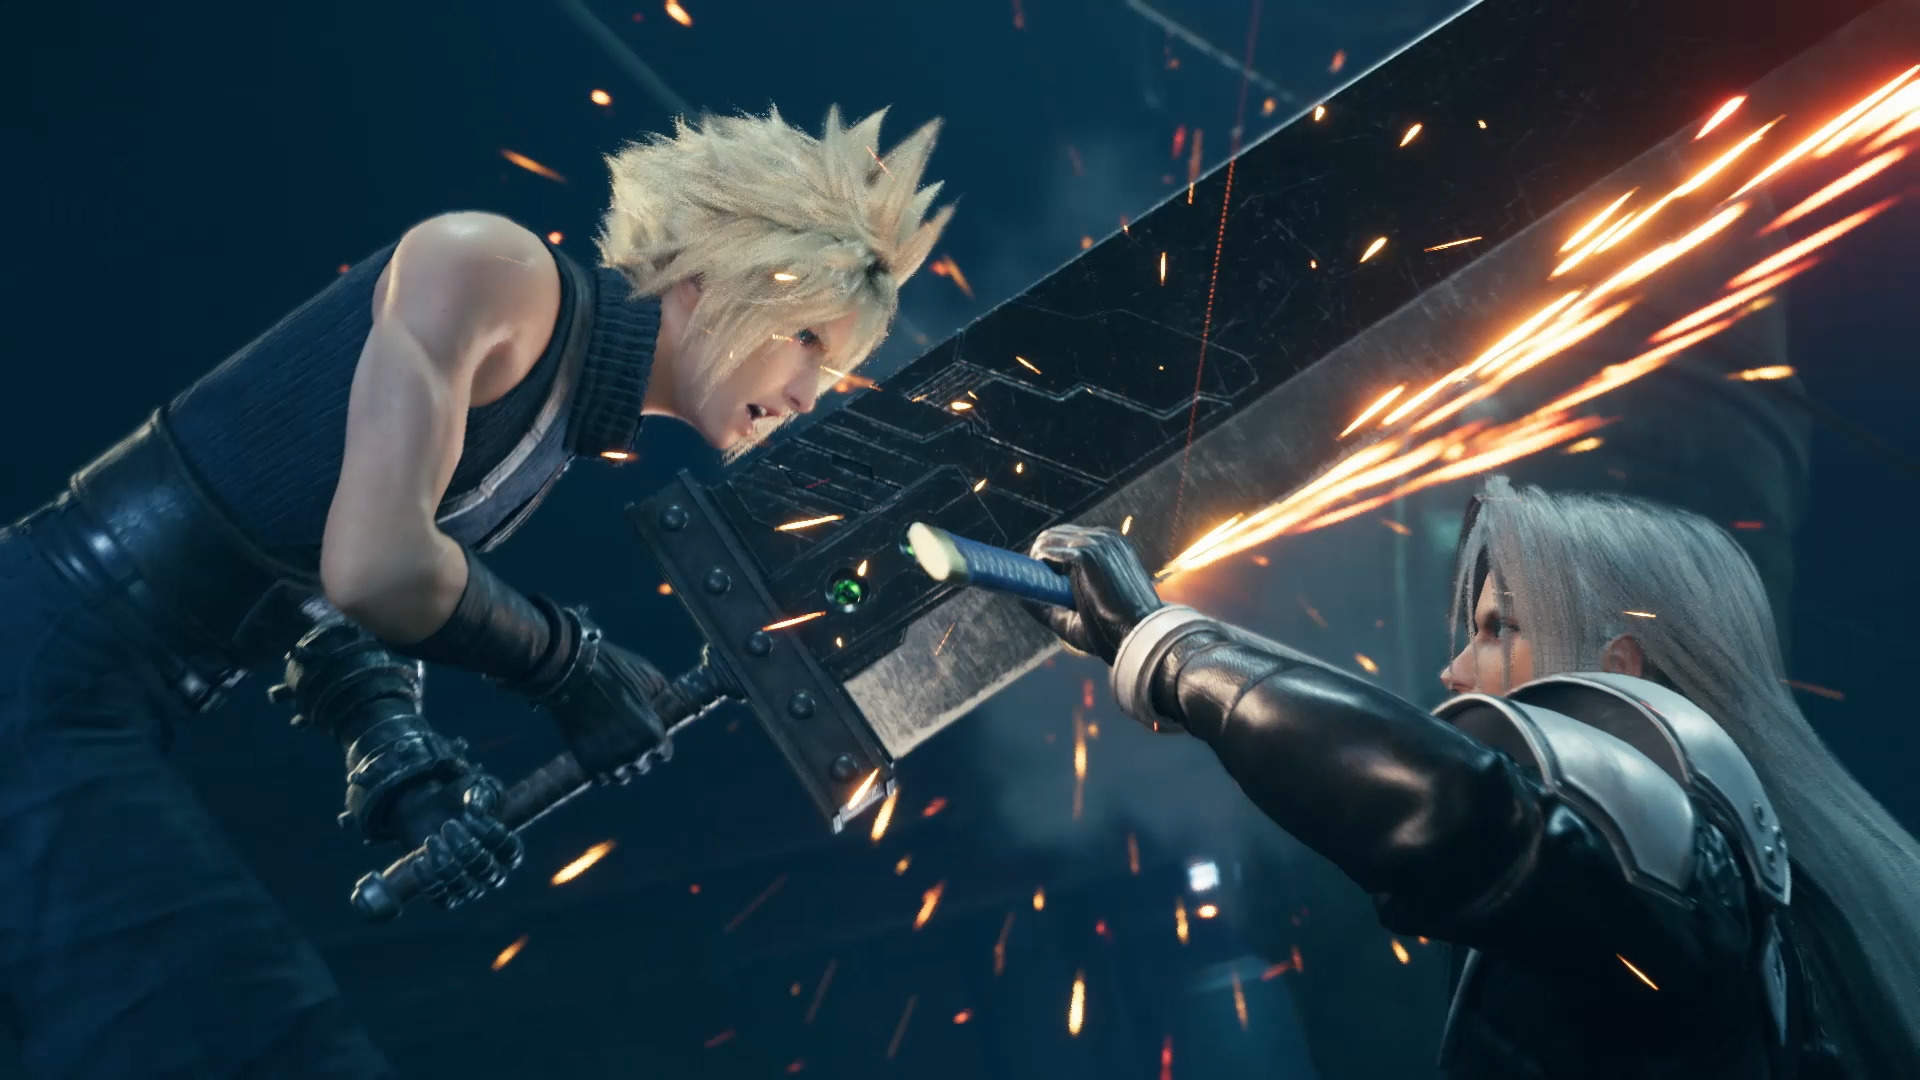 Final Fantasy characters fighting